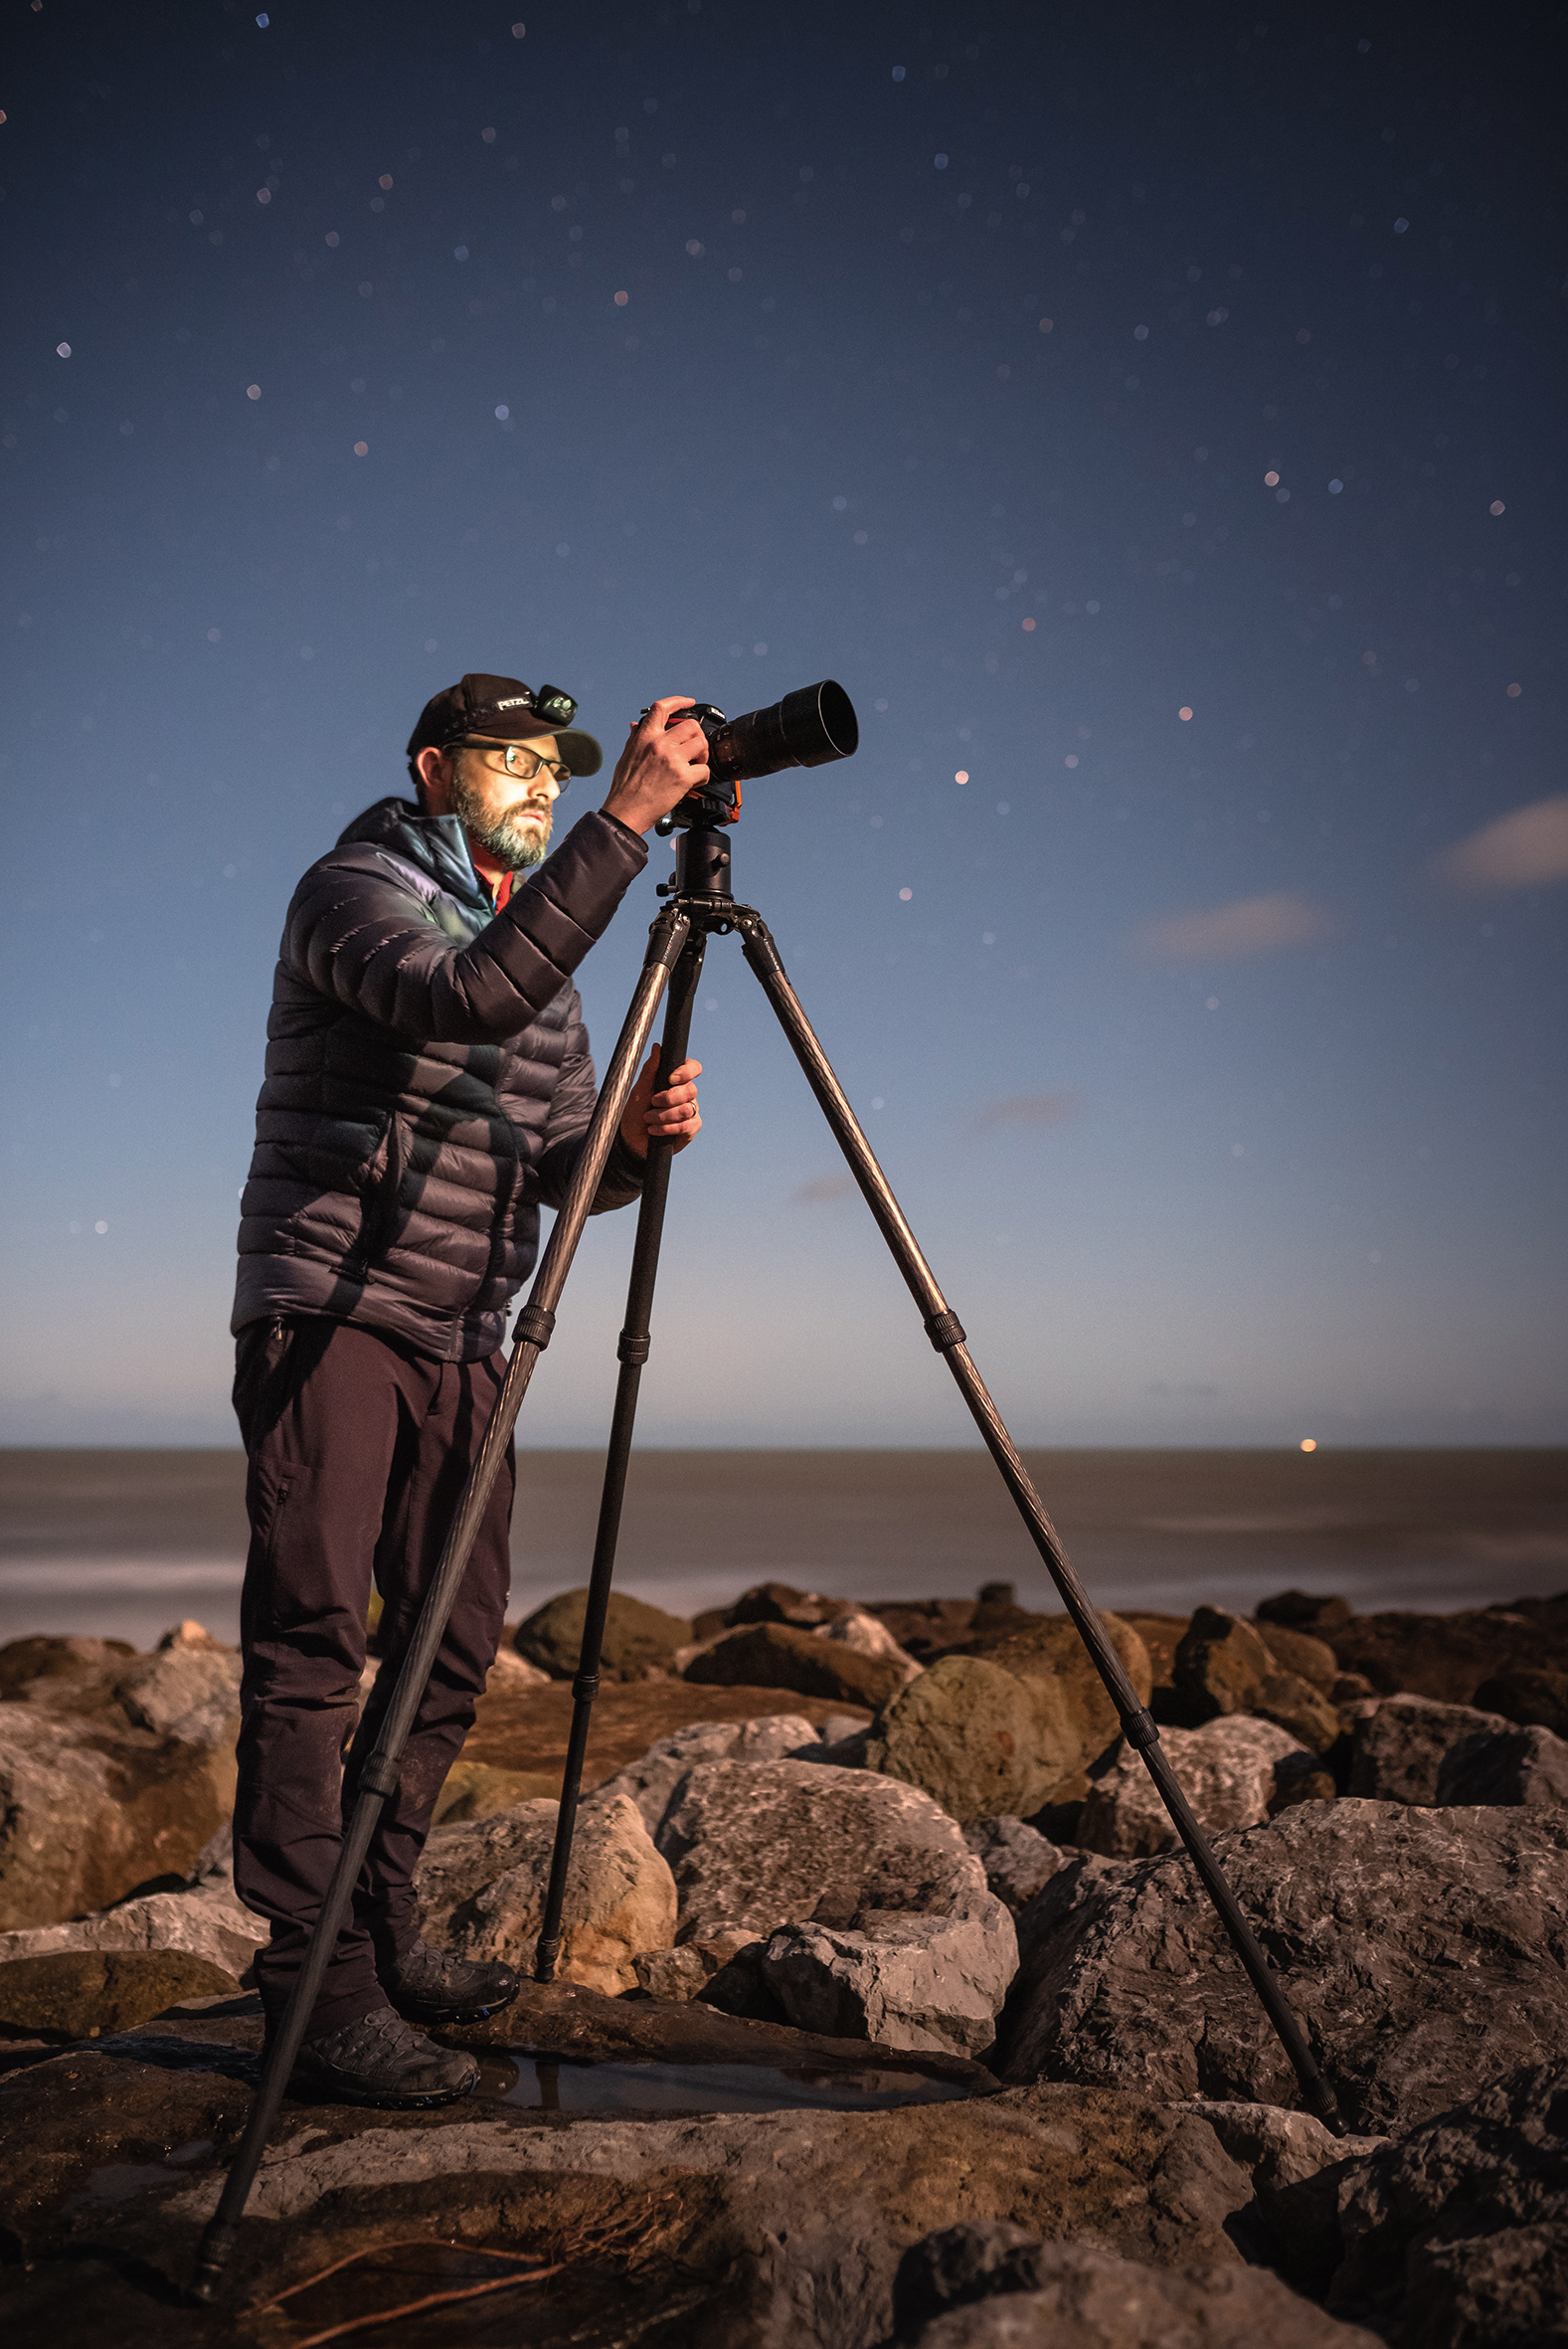 Photographer Ainsley Bennett taking photos with a camera on a tripod at night